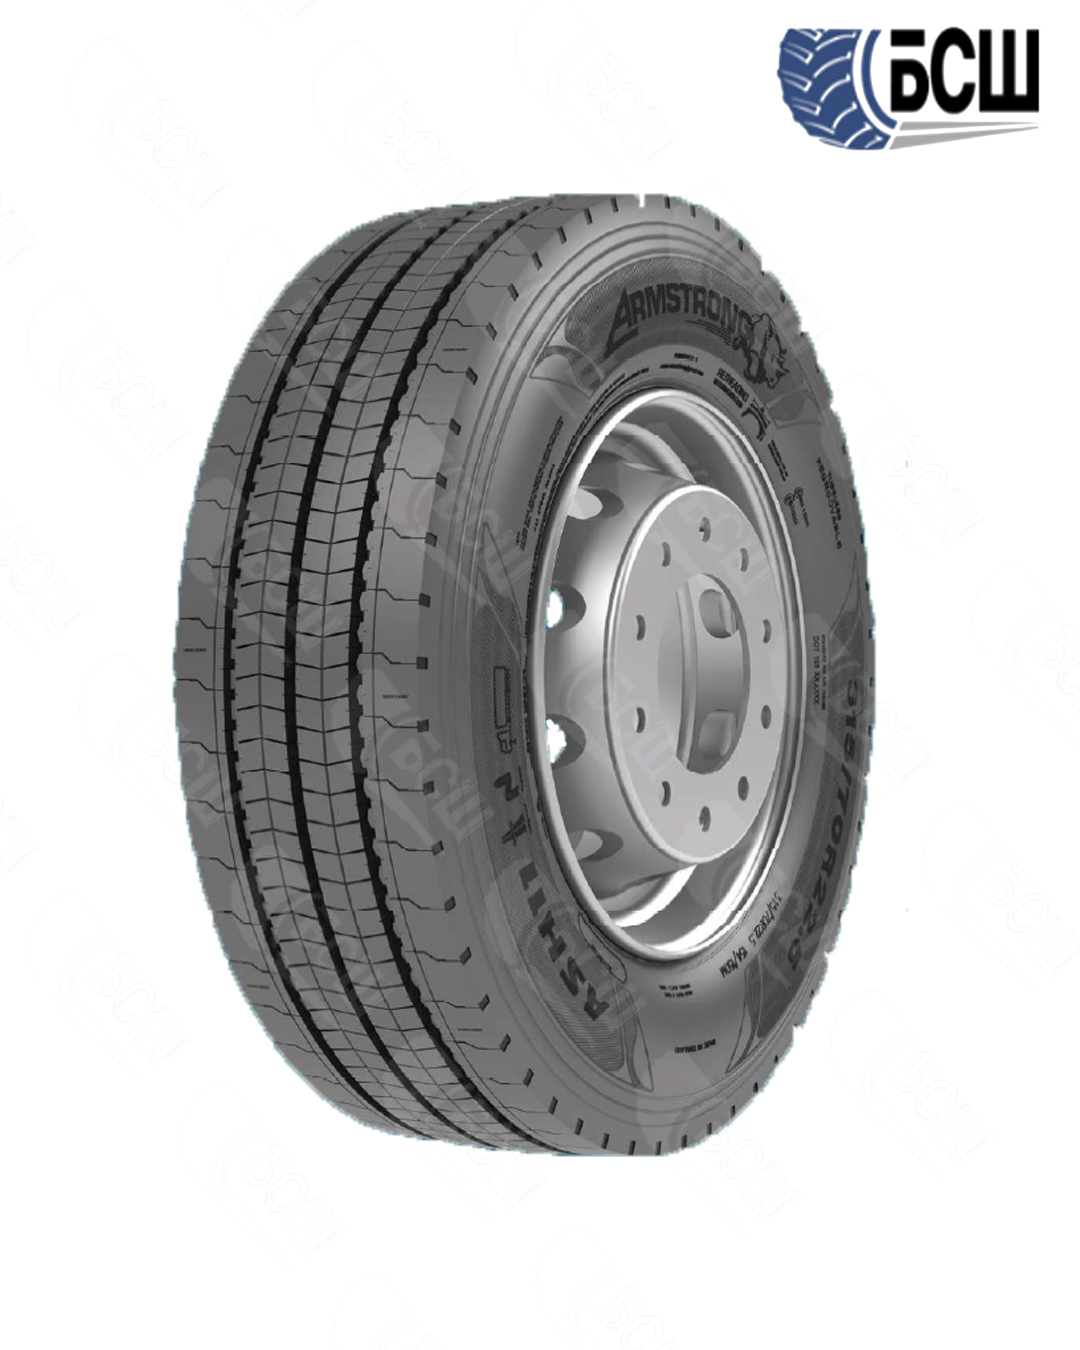 Шина 315/80R22.5/20 ASH11 ARMSTRONG 156/150L M+S 3PMSF TL(T)